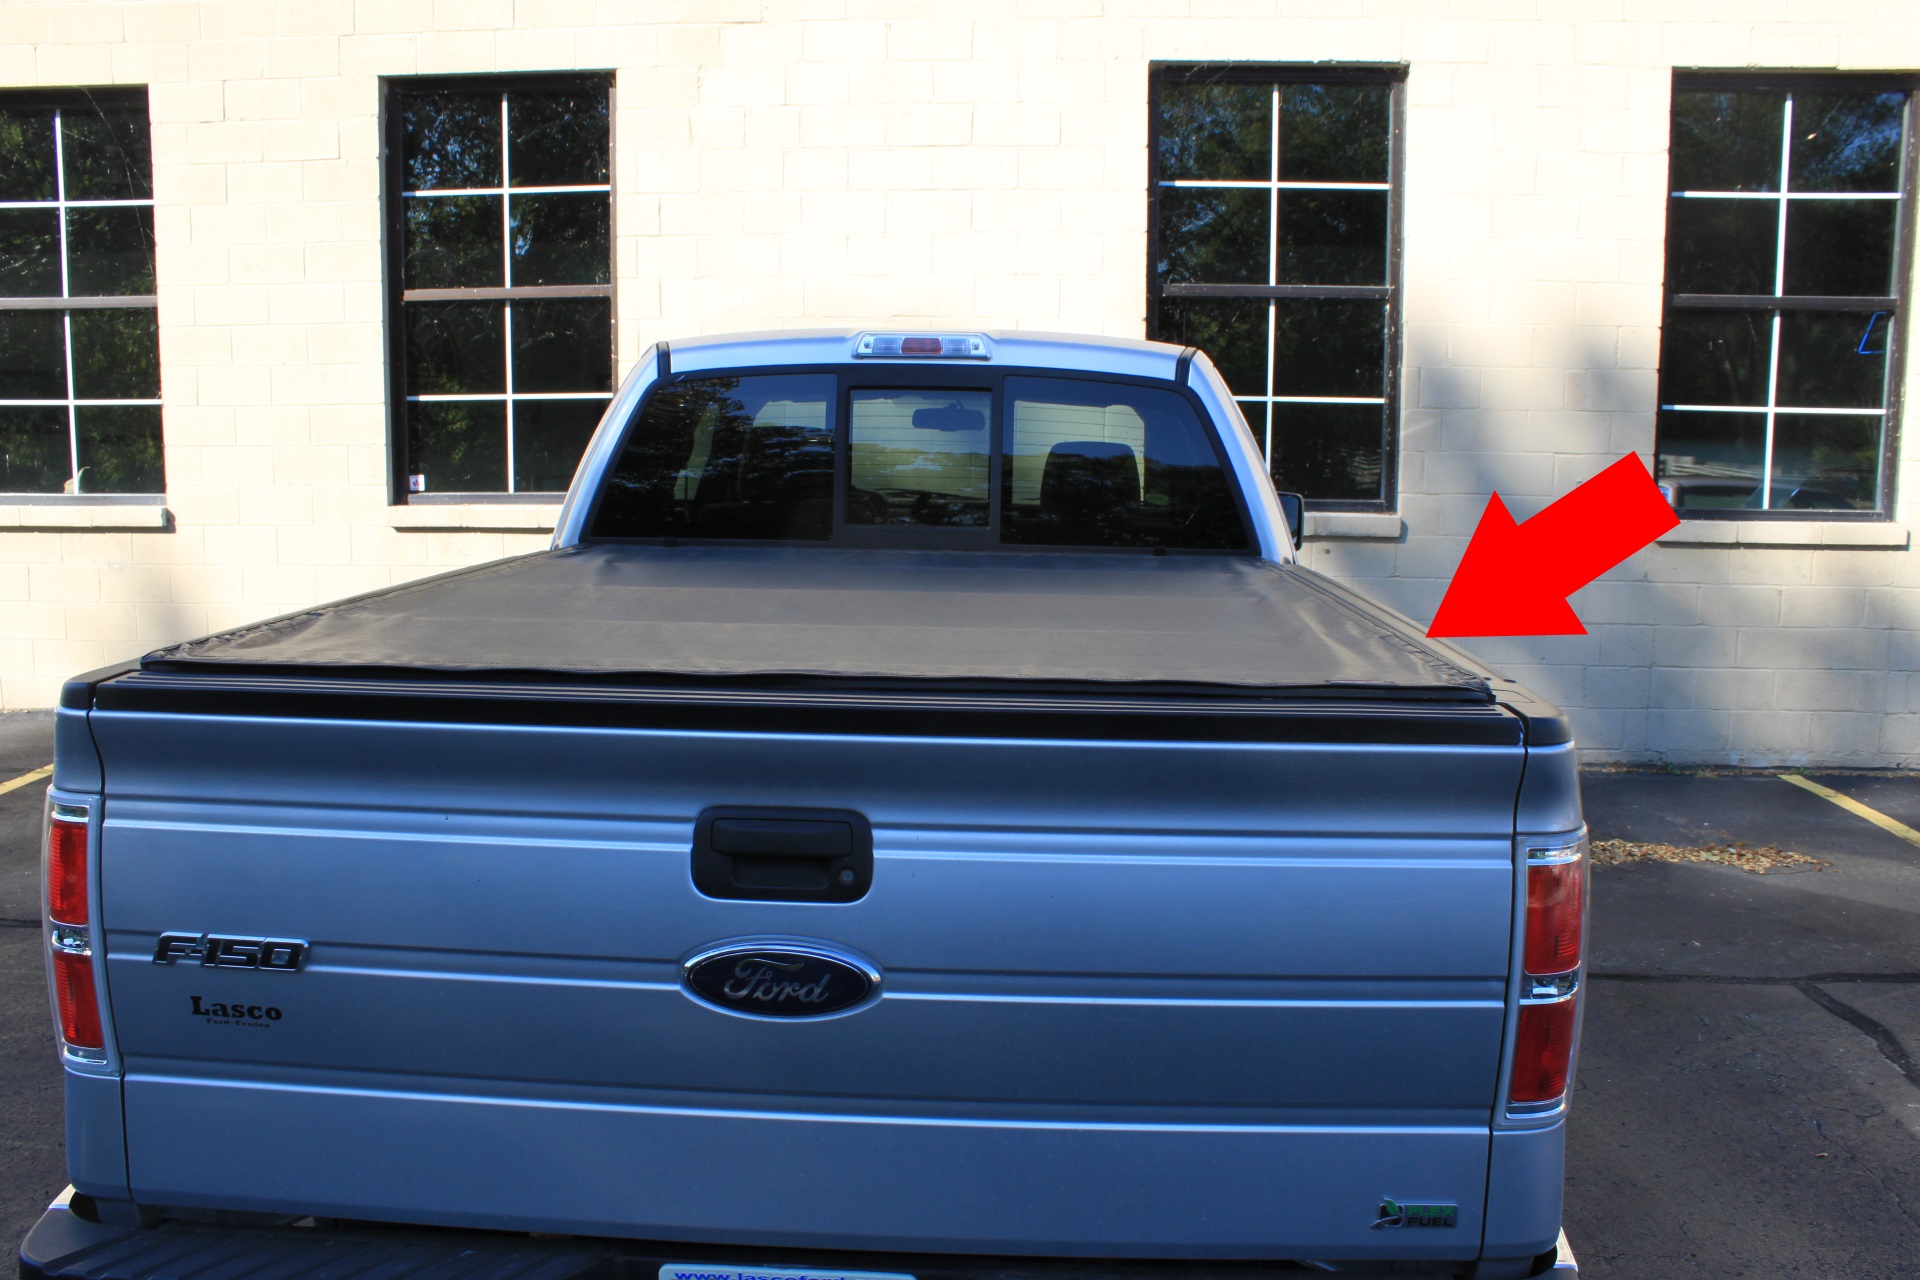 truck bed cover for bikes